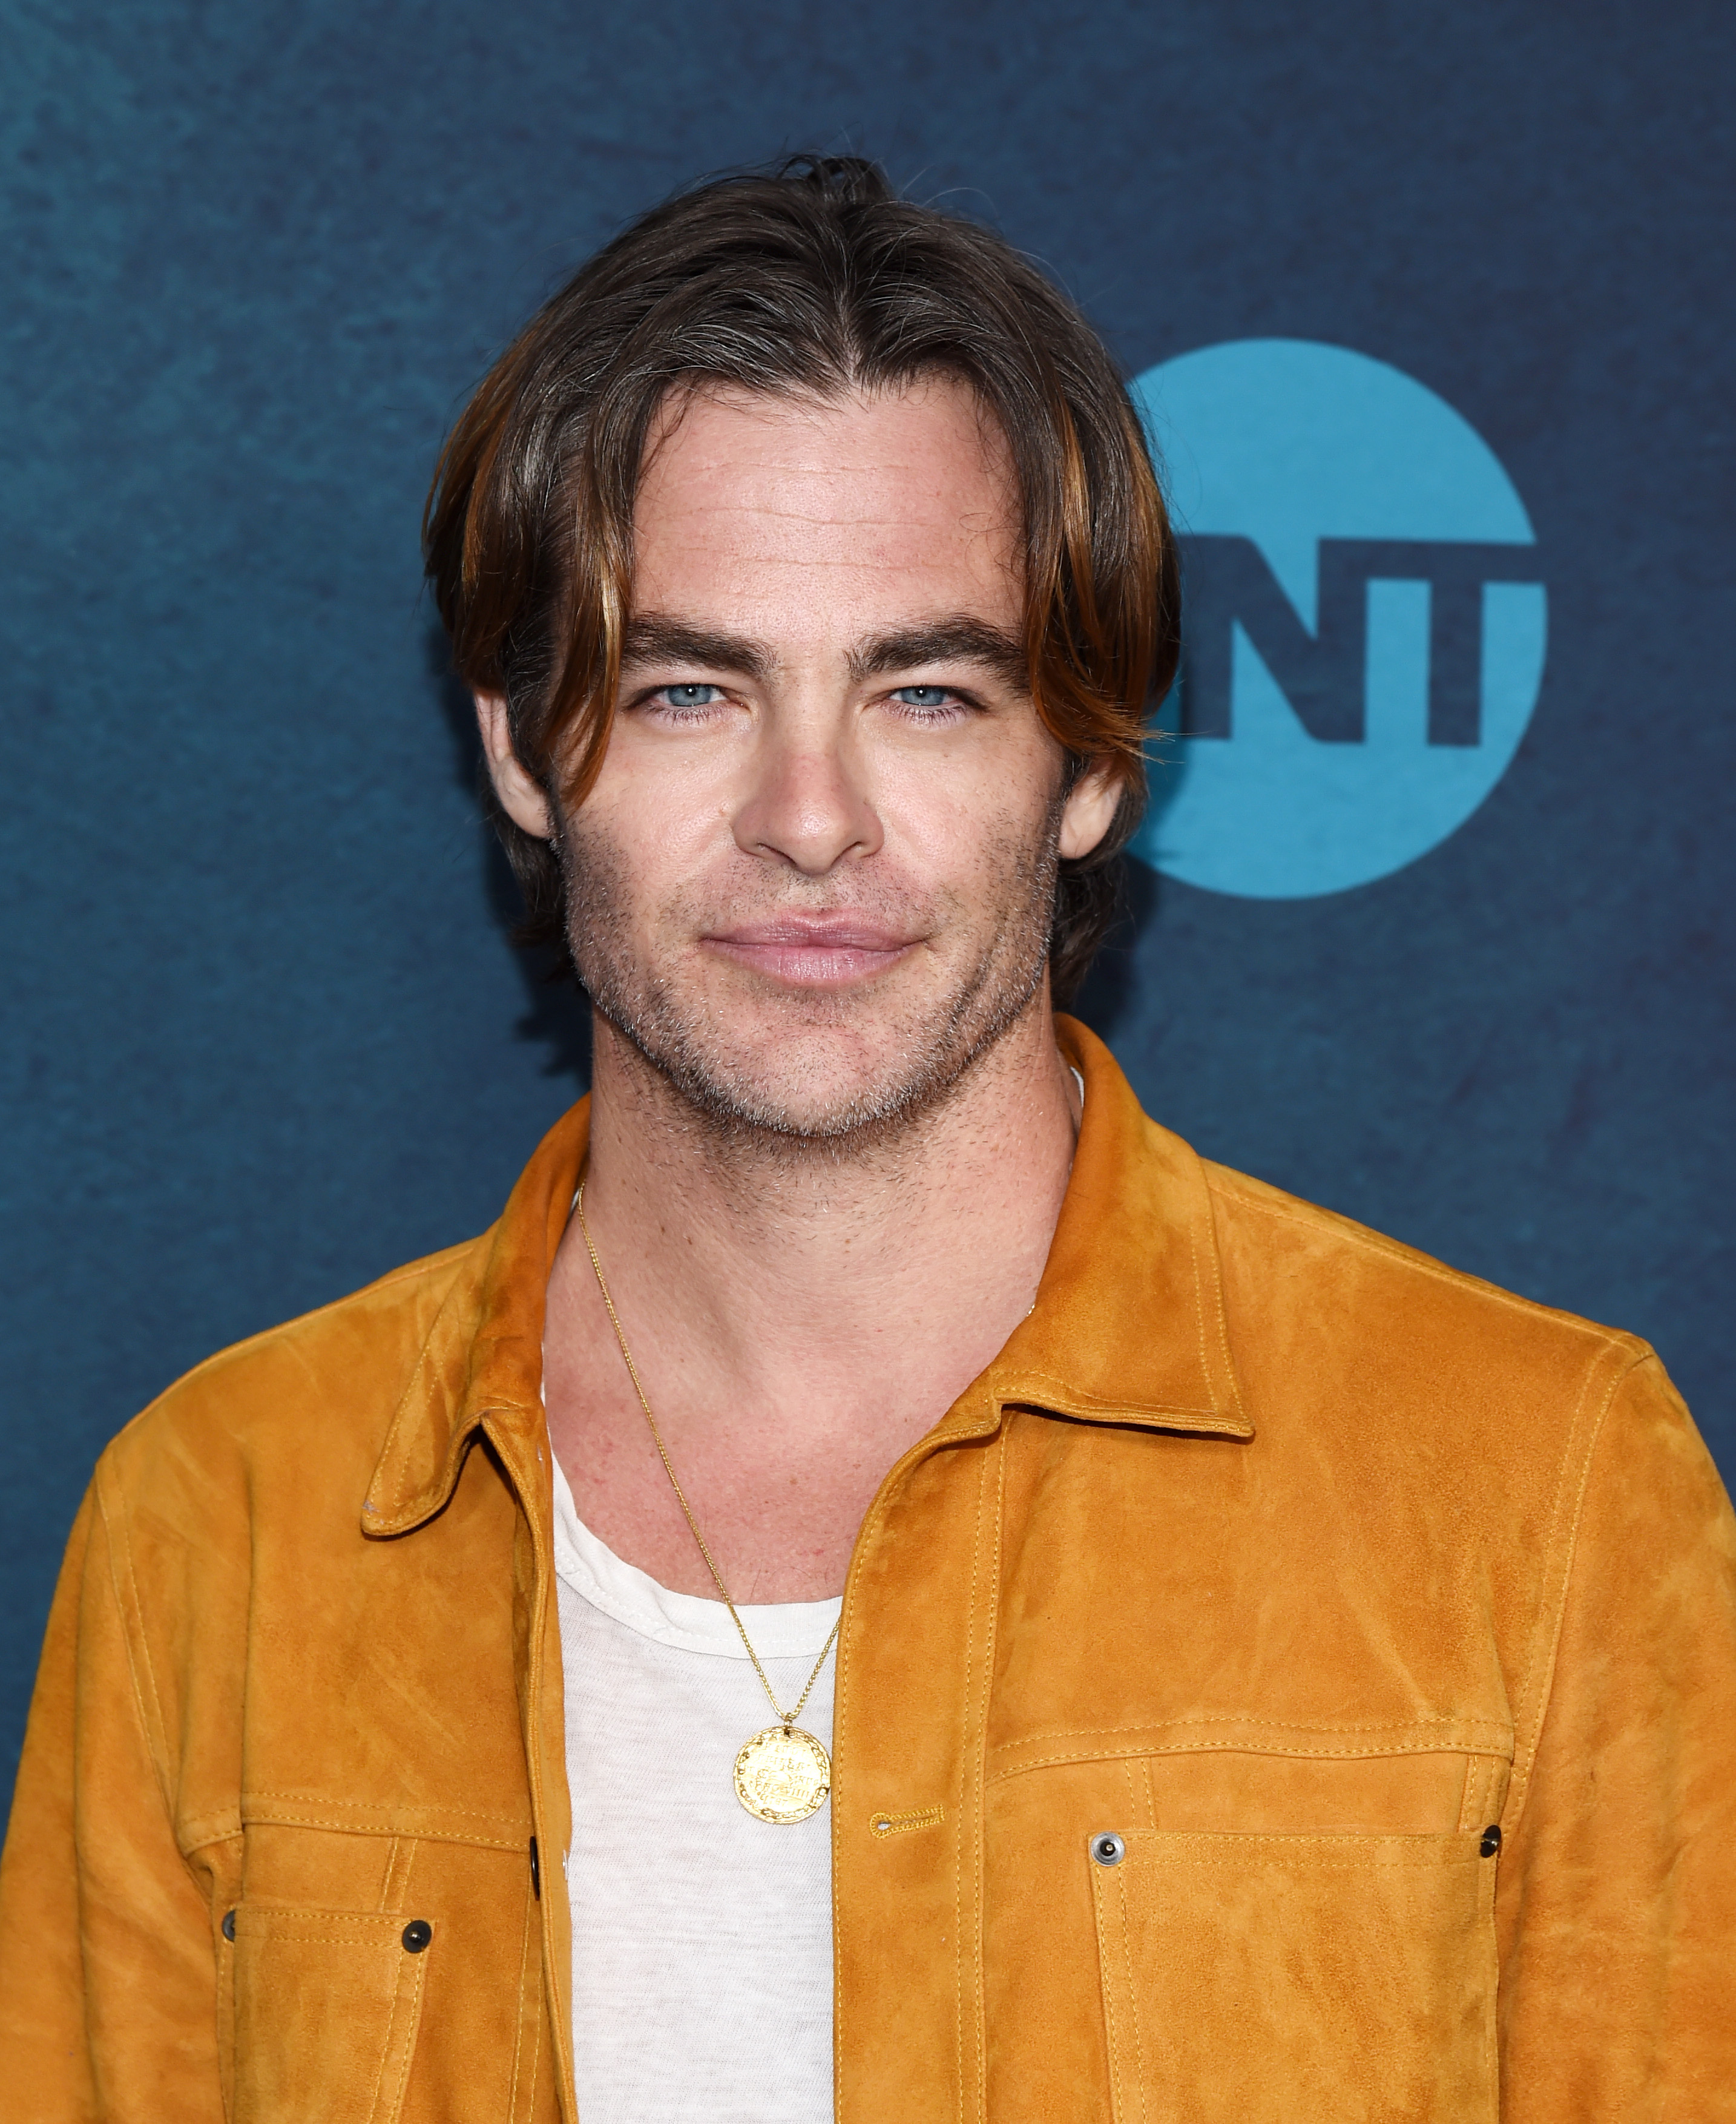 Chris Pine during TNT's "I Am The Night" EMMY For Your Consideration Event at the Television Academy on May 9, 2019 in Los Angeles, California. | Source: Getty Images